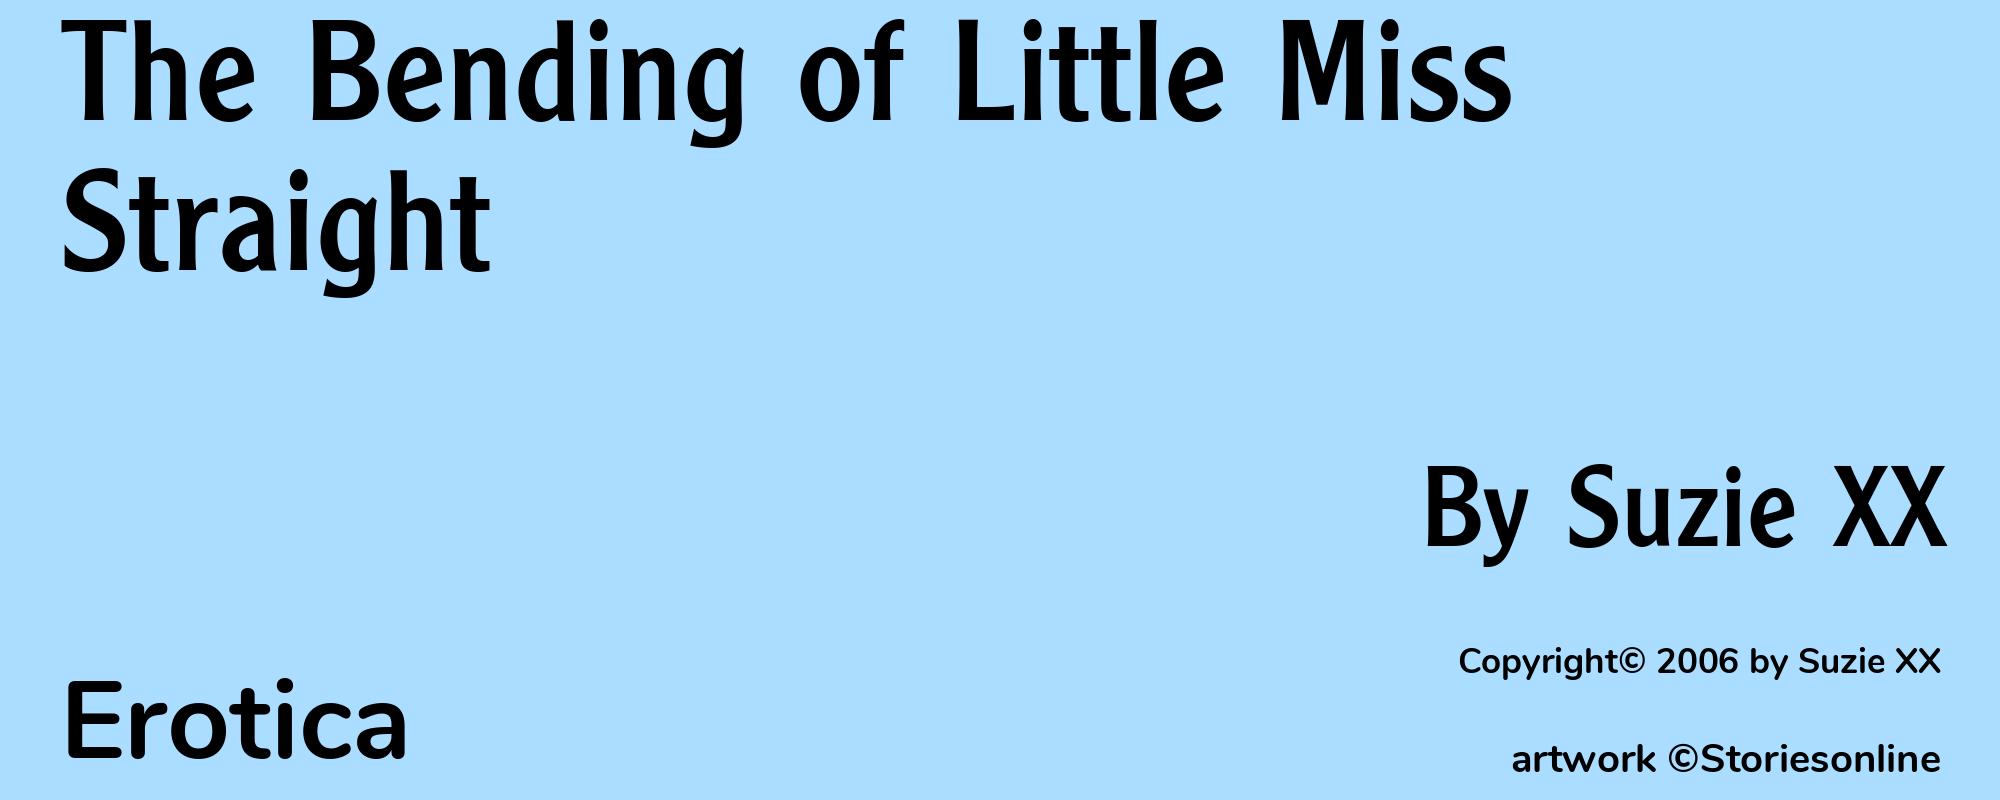 The Bending of Little Miss Straight - Cover